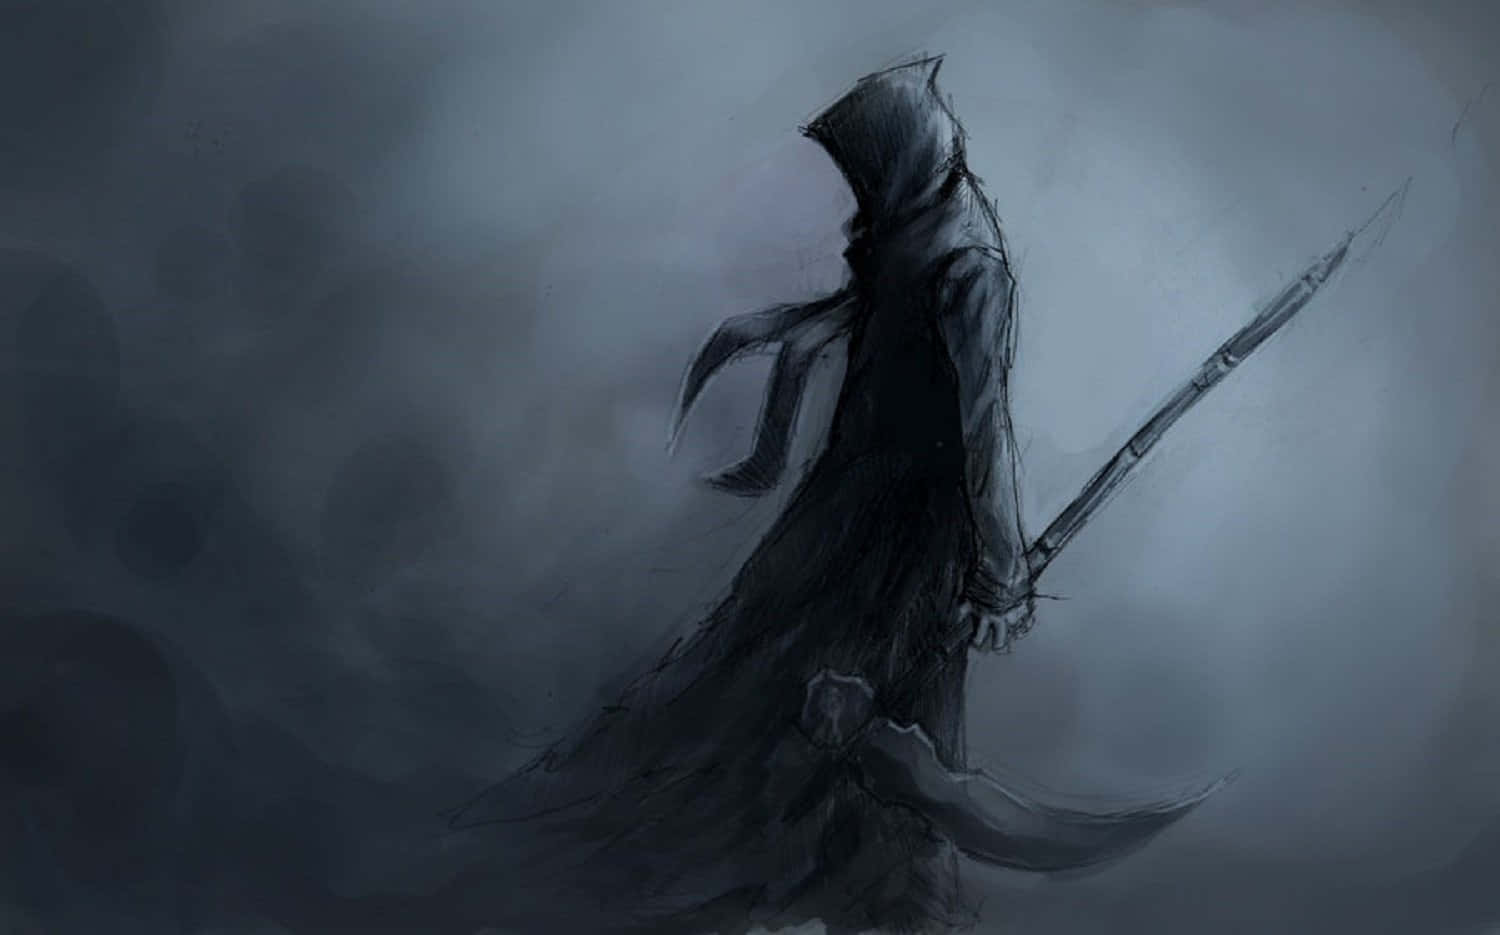 A Grim Reaper With A Sword In His Hand